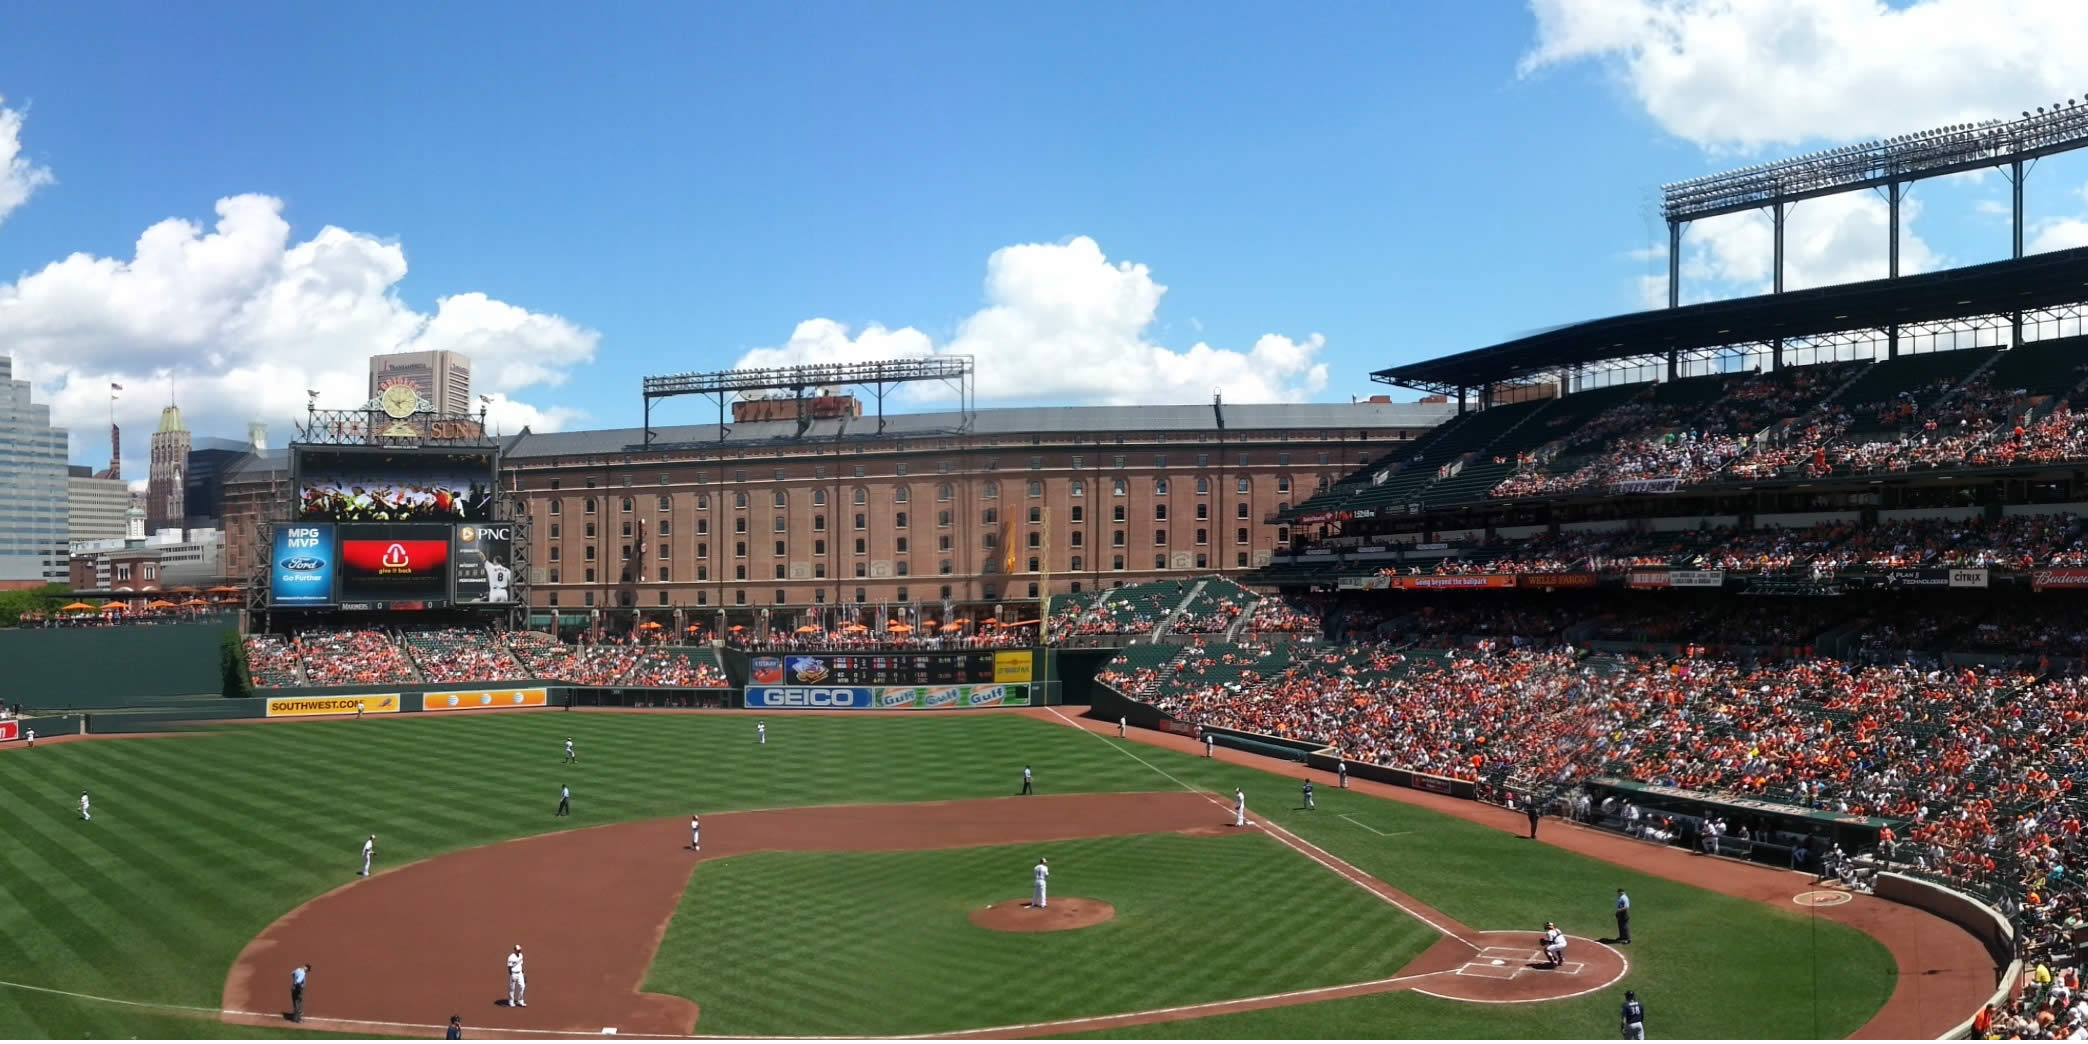 Orioles 3d Seating Chart